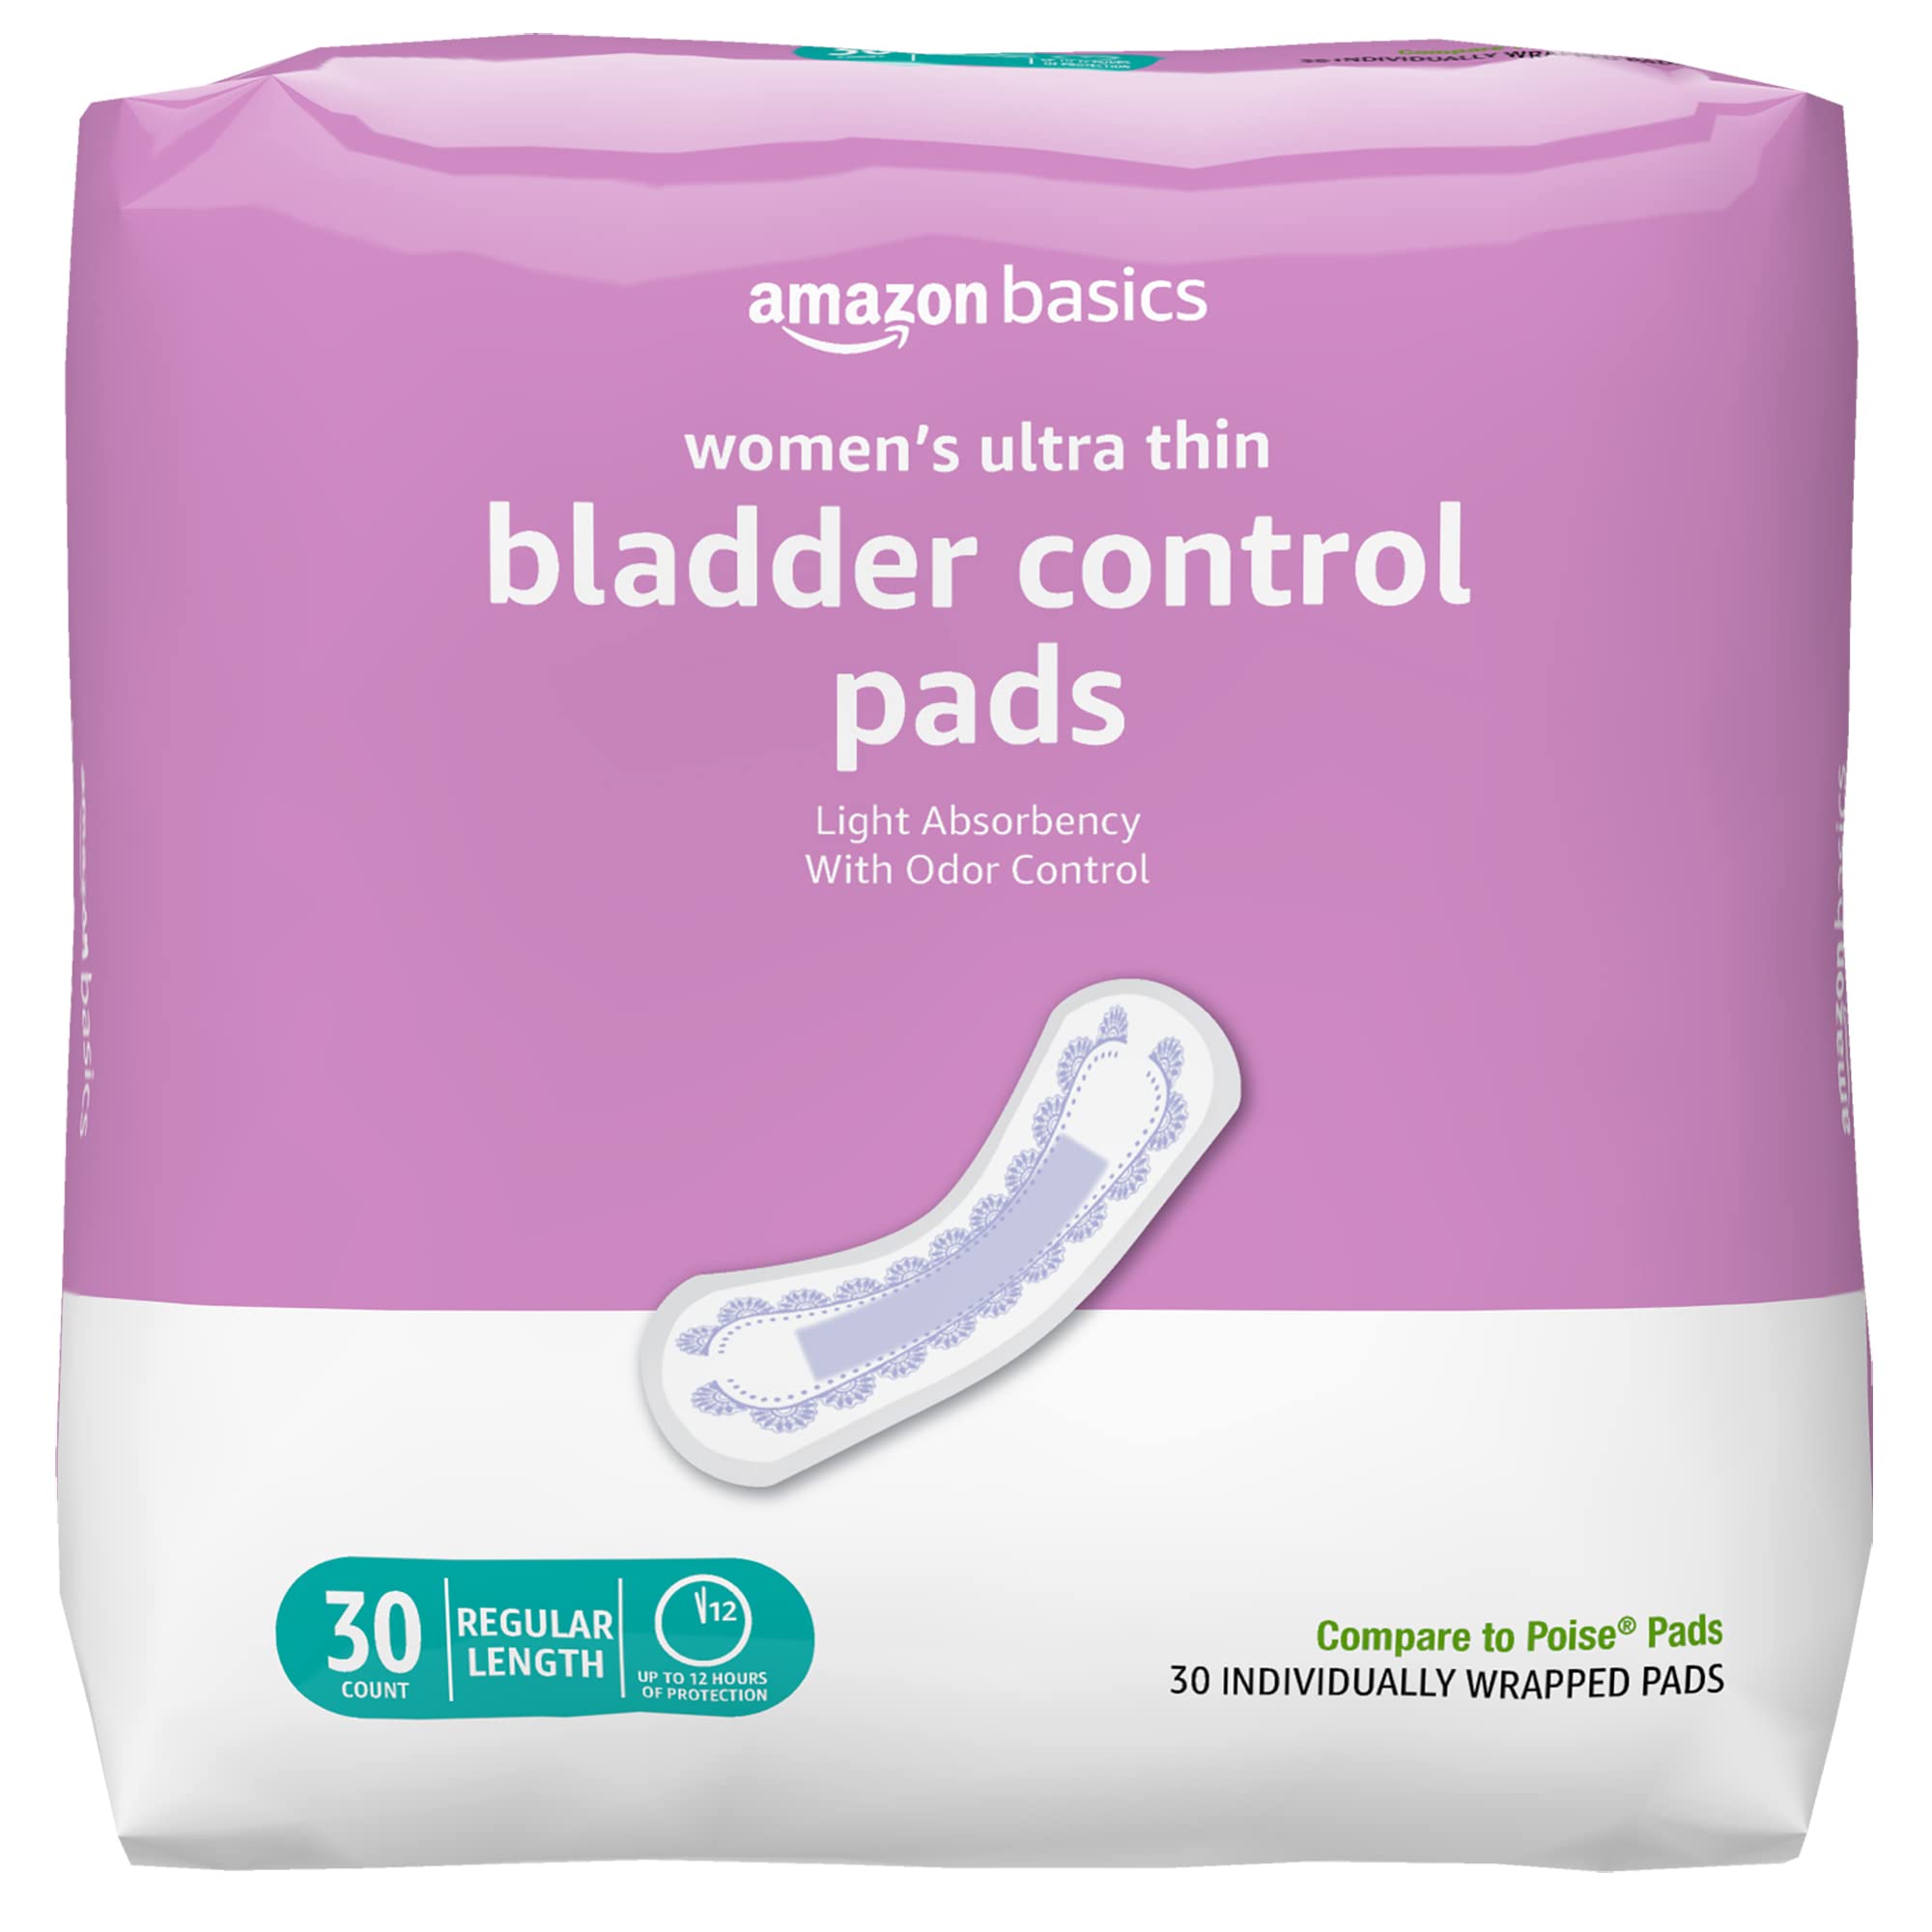 Amazon Basics Ultra Thin Incontinence, Bladder Control & Postpartum Pads for Women, Regular Length, Light Absorbency, Unscented, 30 count, 1 Pack (Previously Solimo)